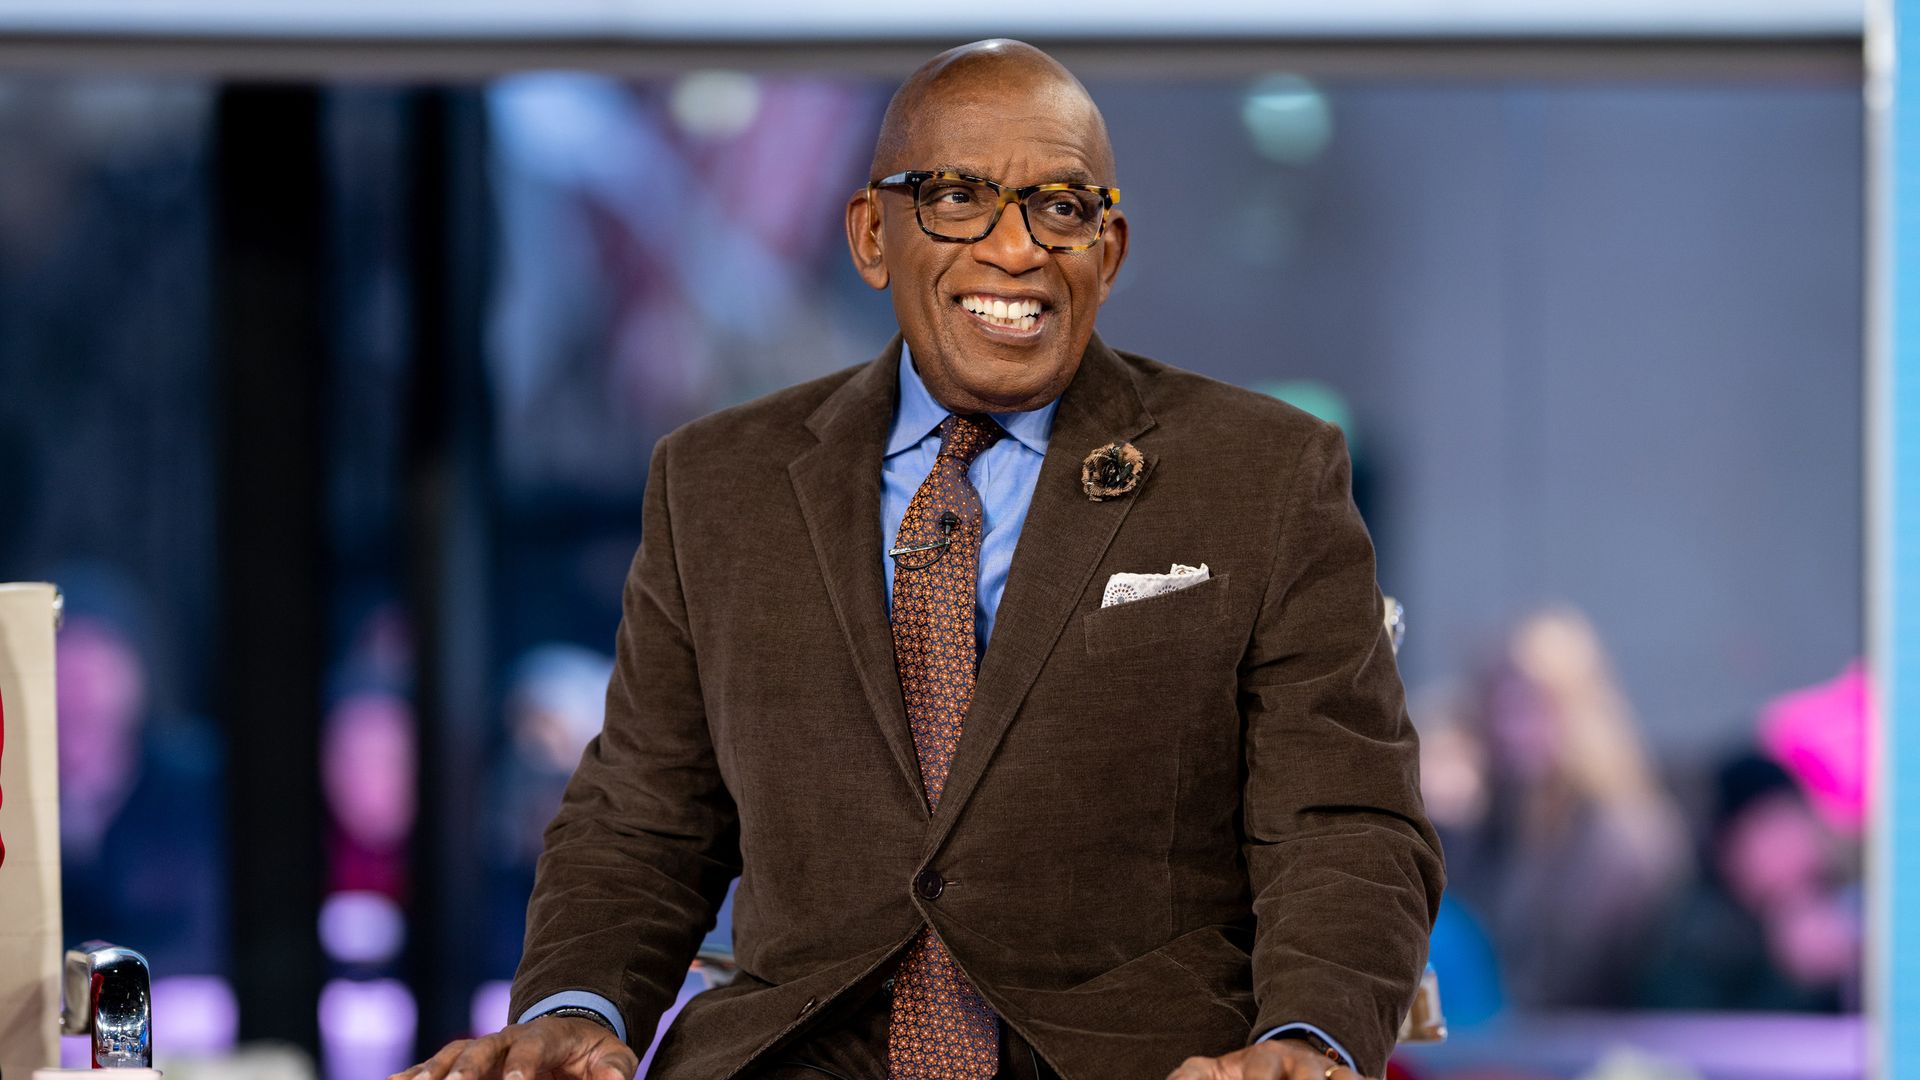 Al Roker praised Savannah for speaking about her faith publicly